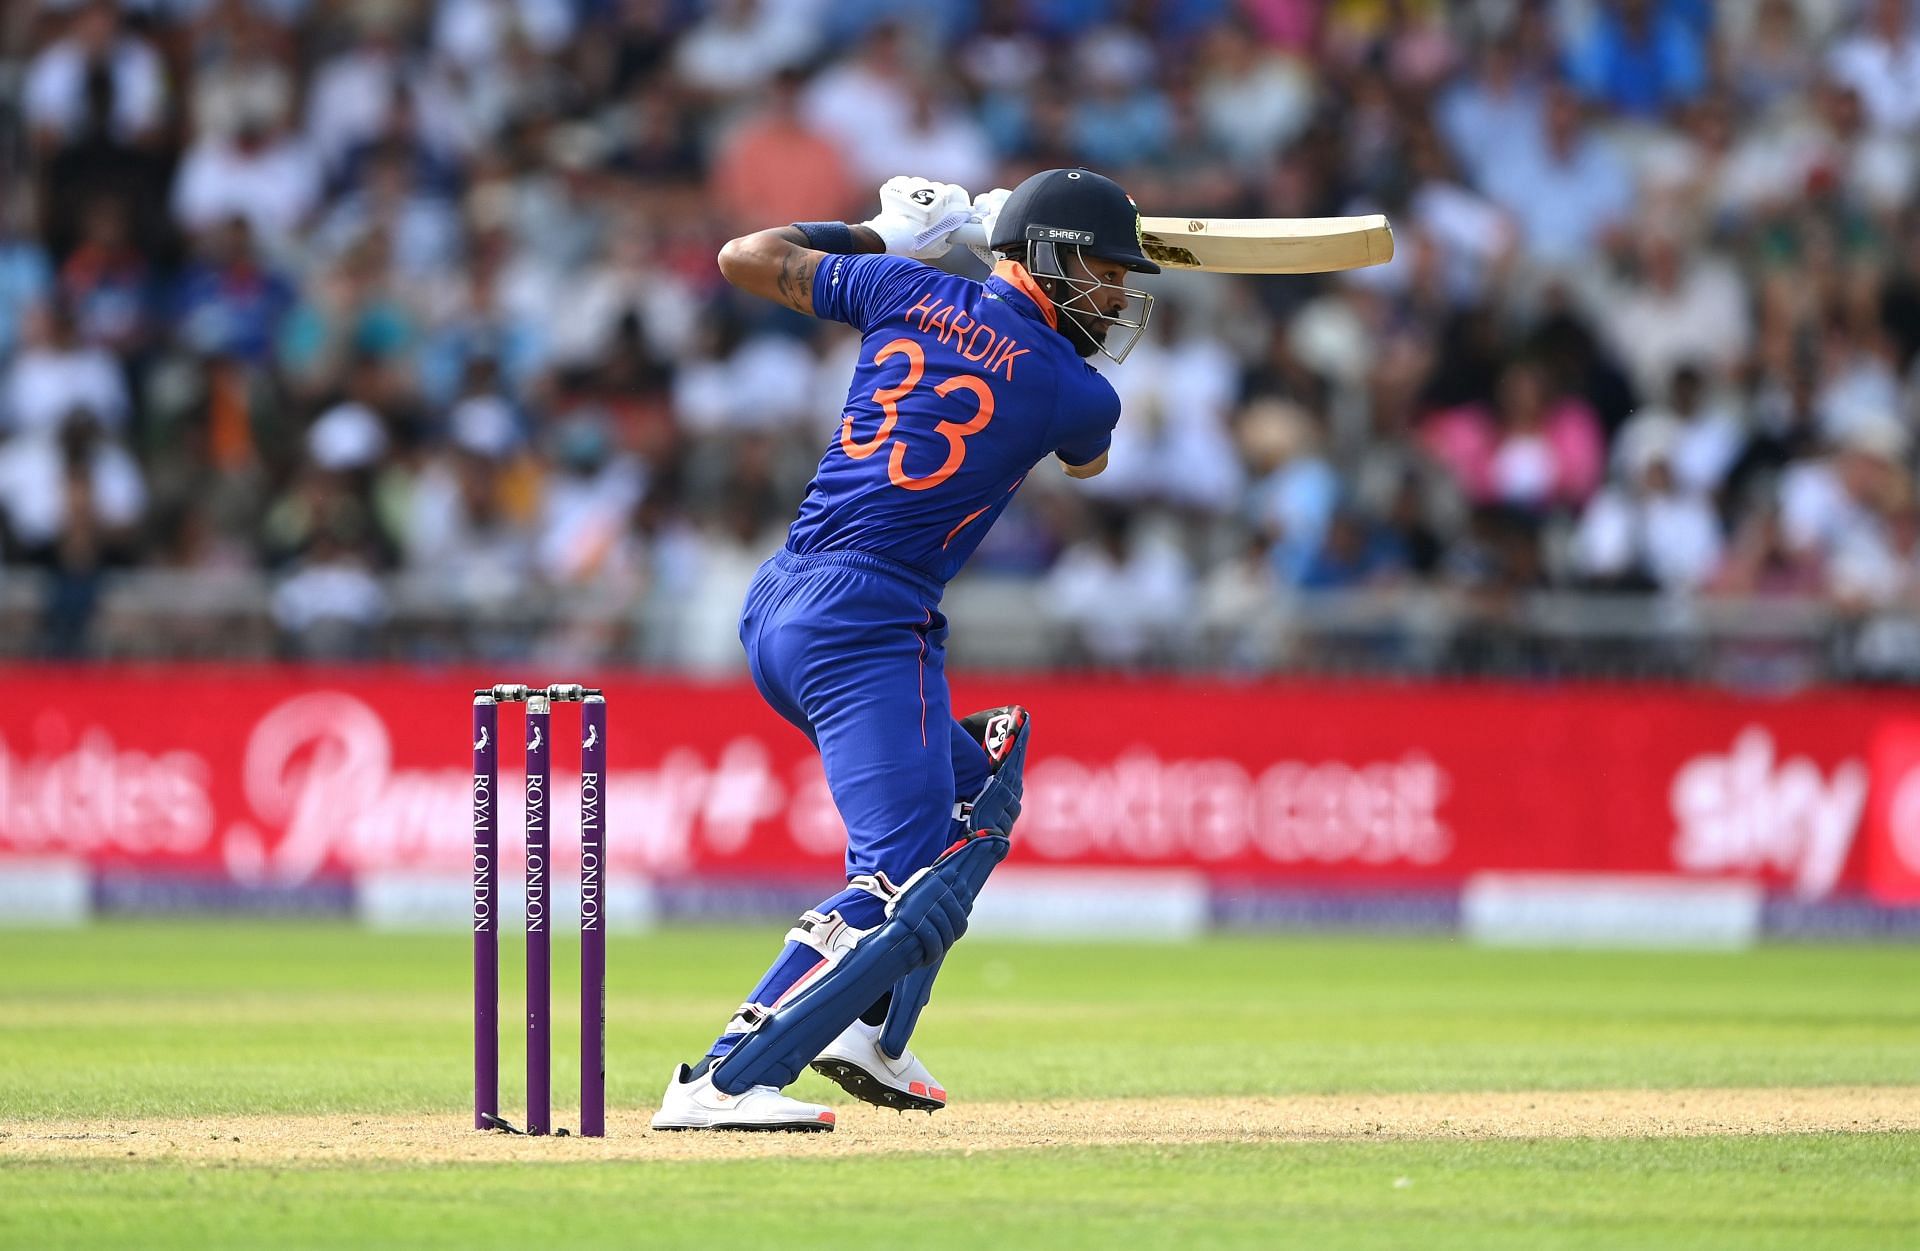 Hardik Pandya has shouldered greater responsibility as a batter in recent times